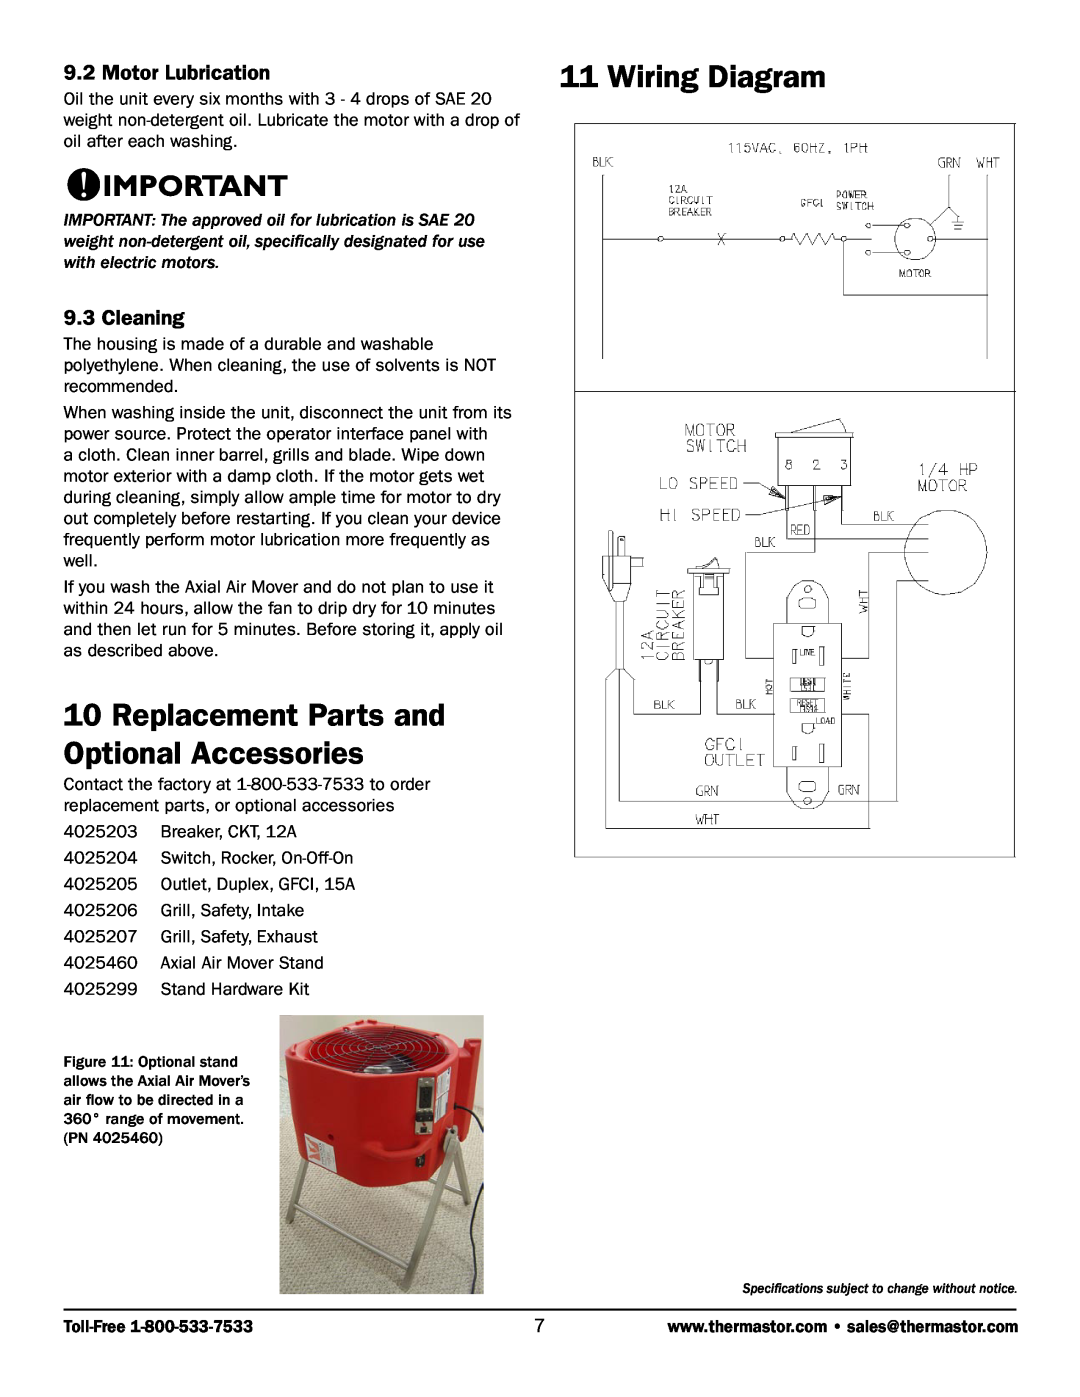 Therma-Stor Products Group TS-285 Replacement Parts and Optional Accessories, Wiring Diagram, Motor Lubrication, Cleaning 